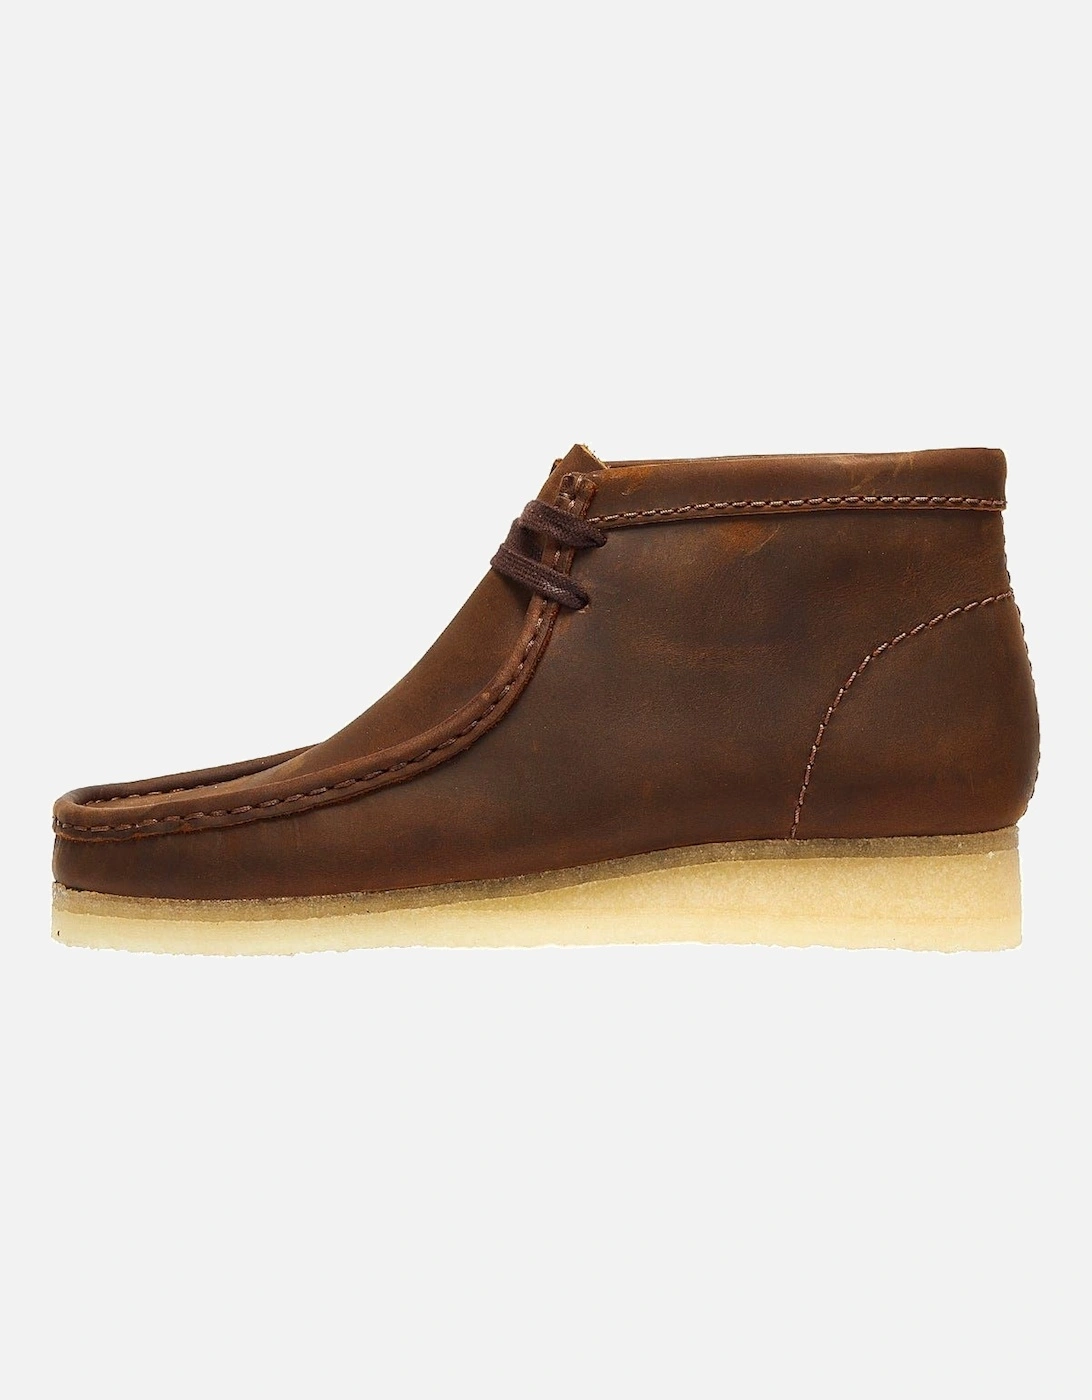 Wallabee Beeswax Men's Brown Boots